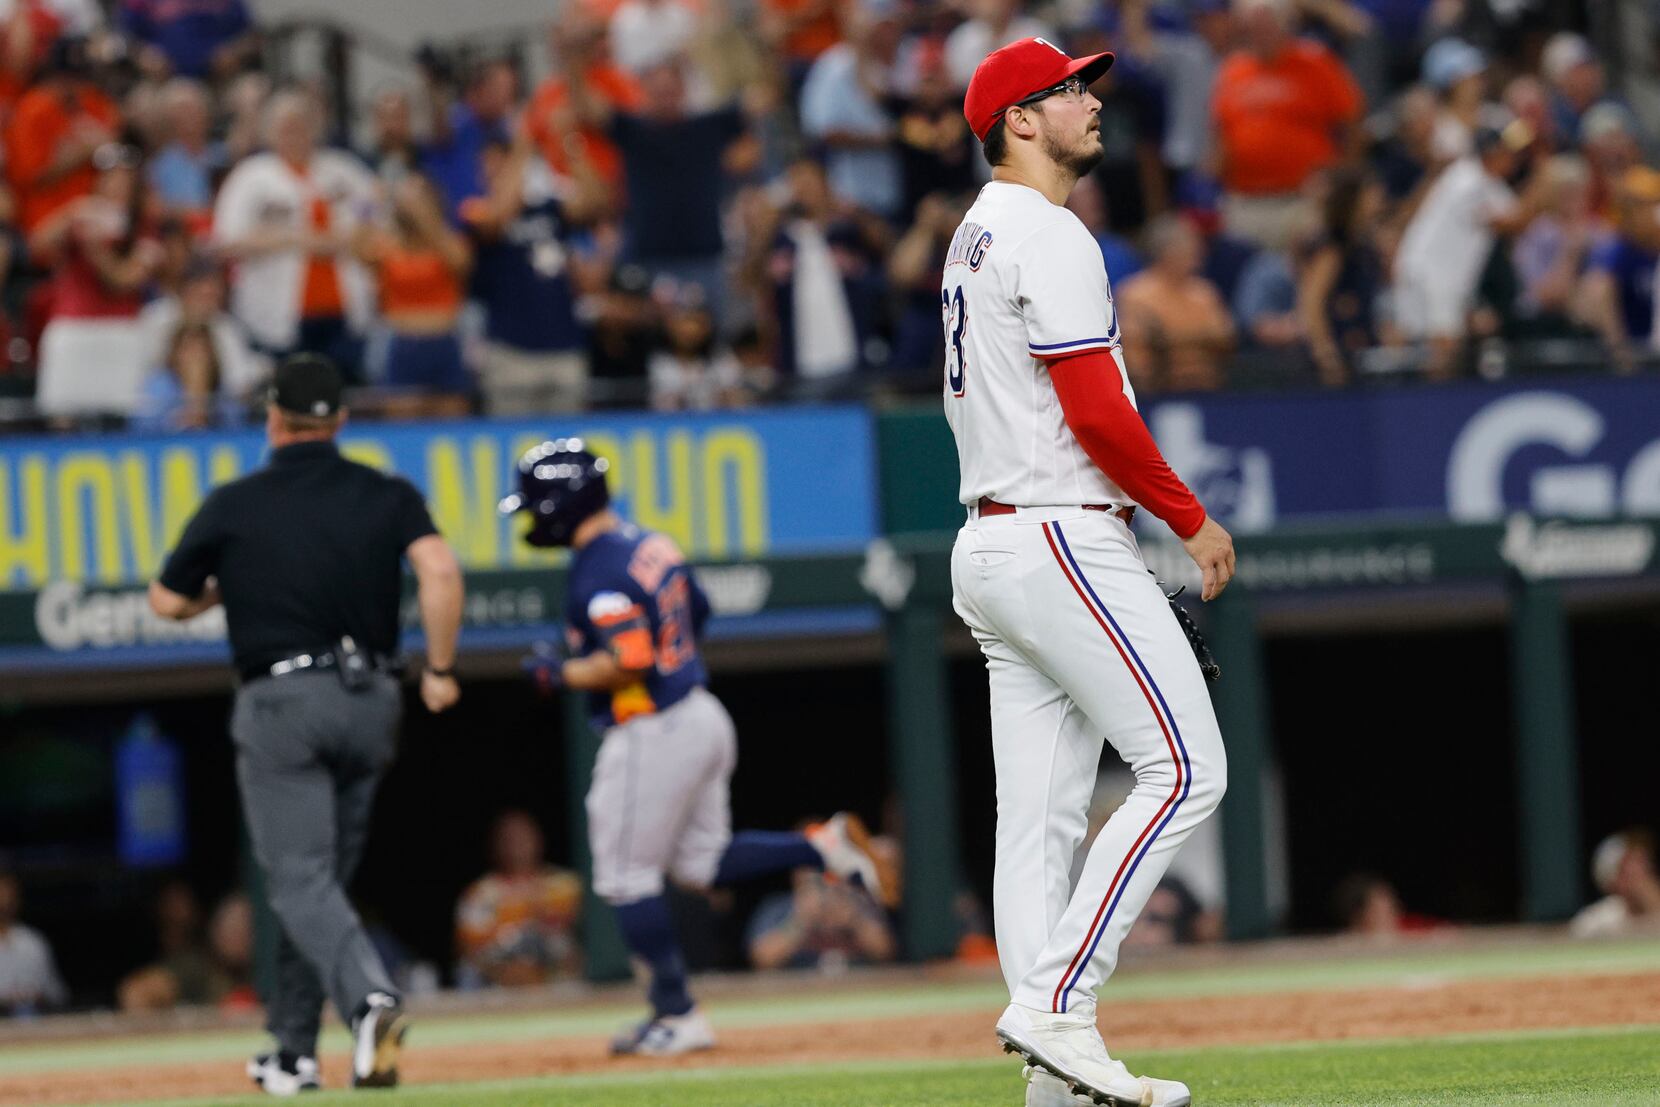 Why Astros-Rangers series finale will make MLB history